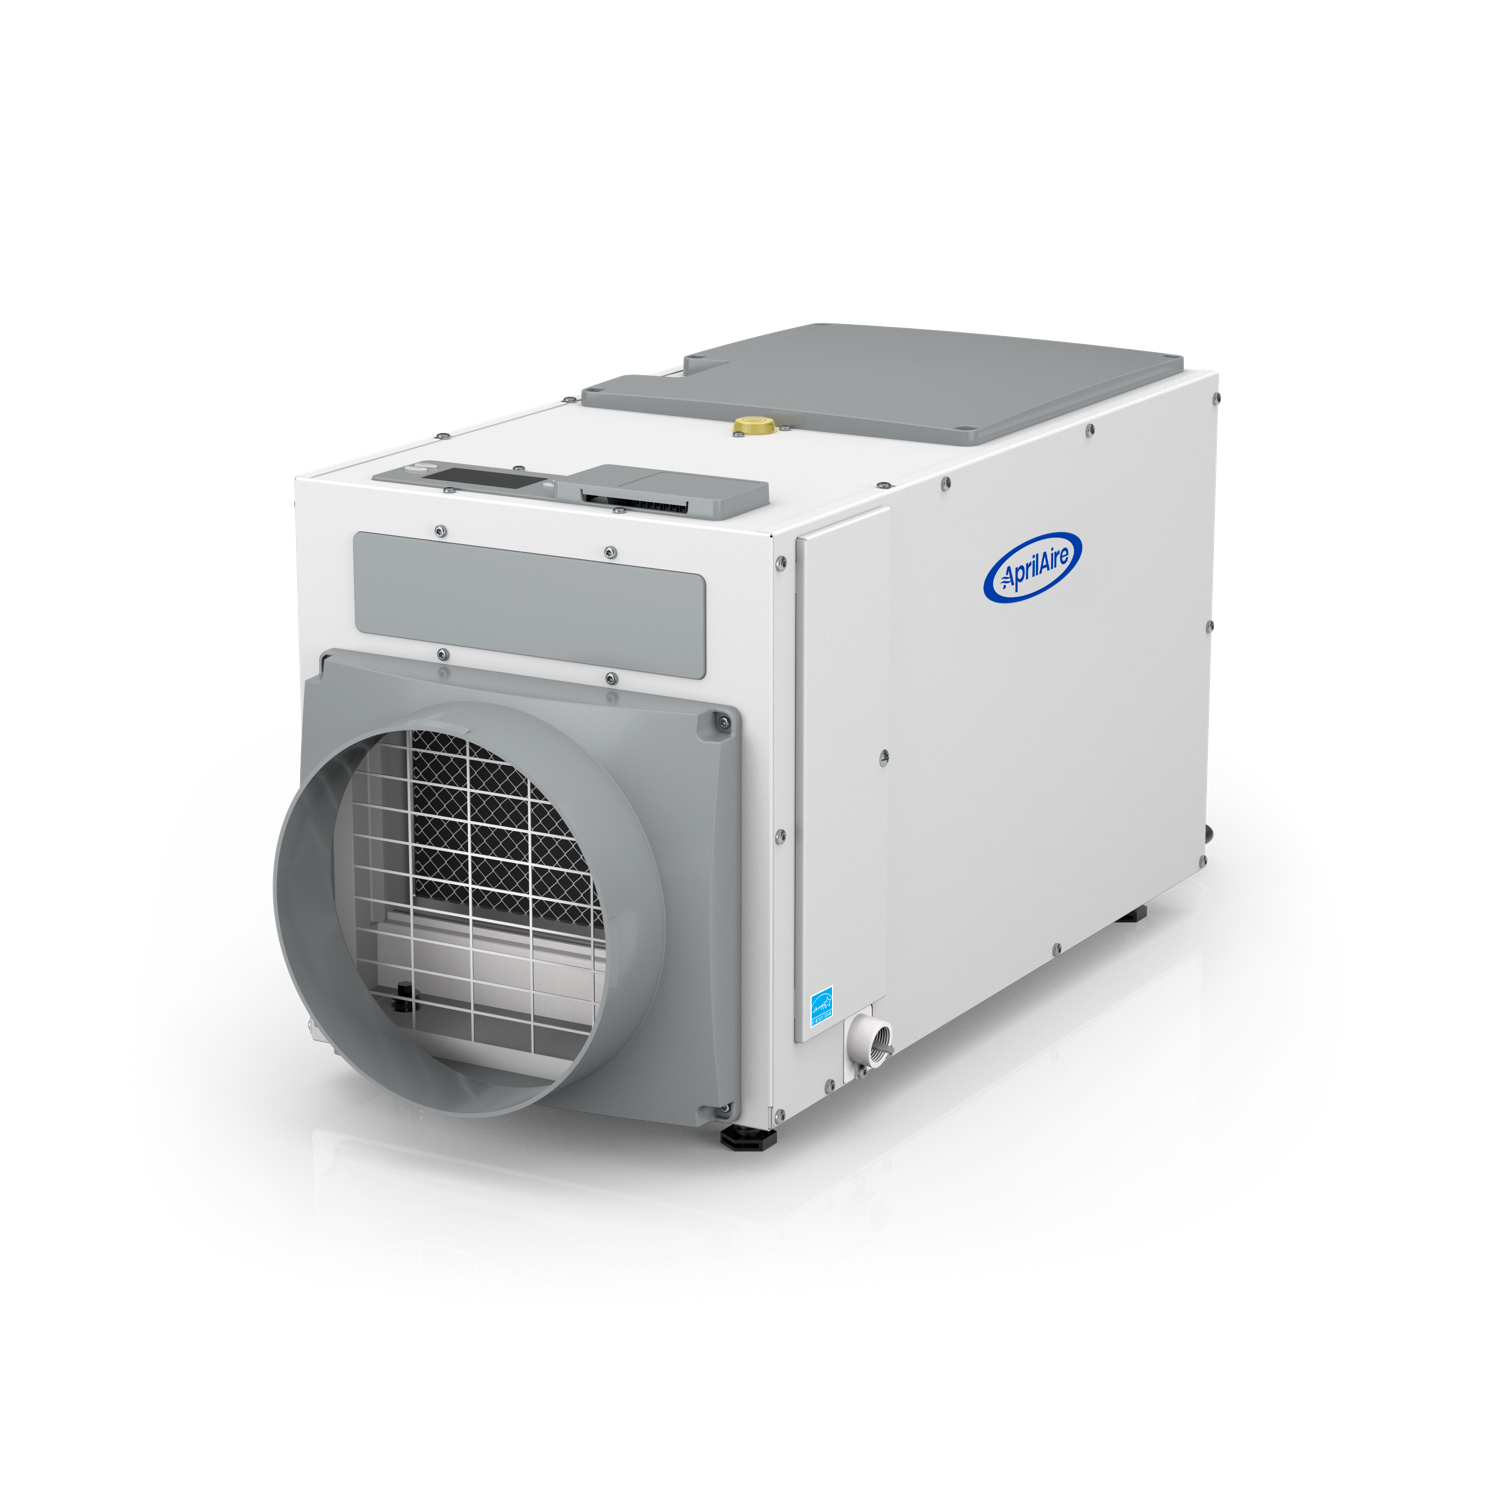 The AprilAire Model E100 Dehumidifier, one of the brand's ENERGY STAR®-certified units, was one of the products contributing to the company's recognition as a Dane County Climate Champion.